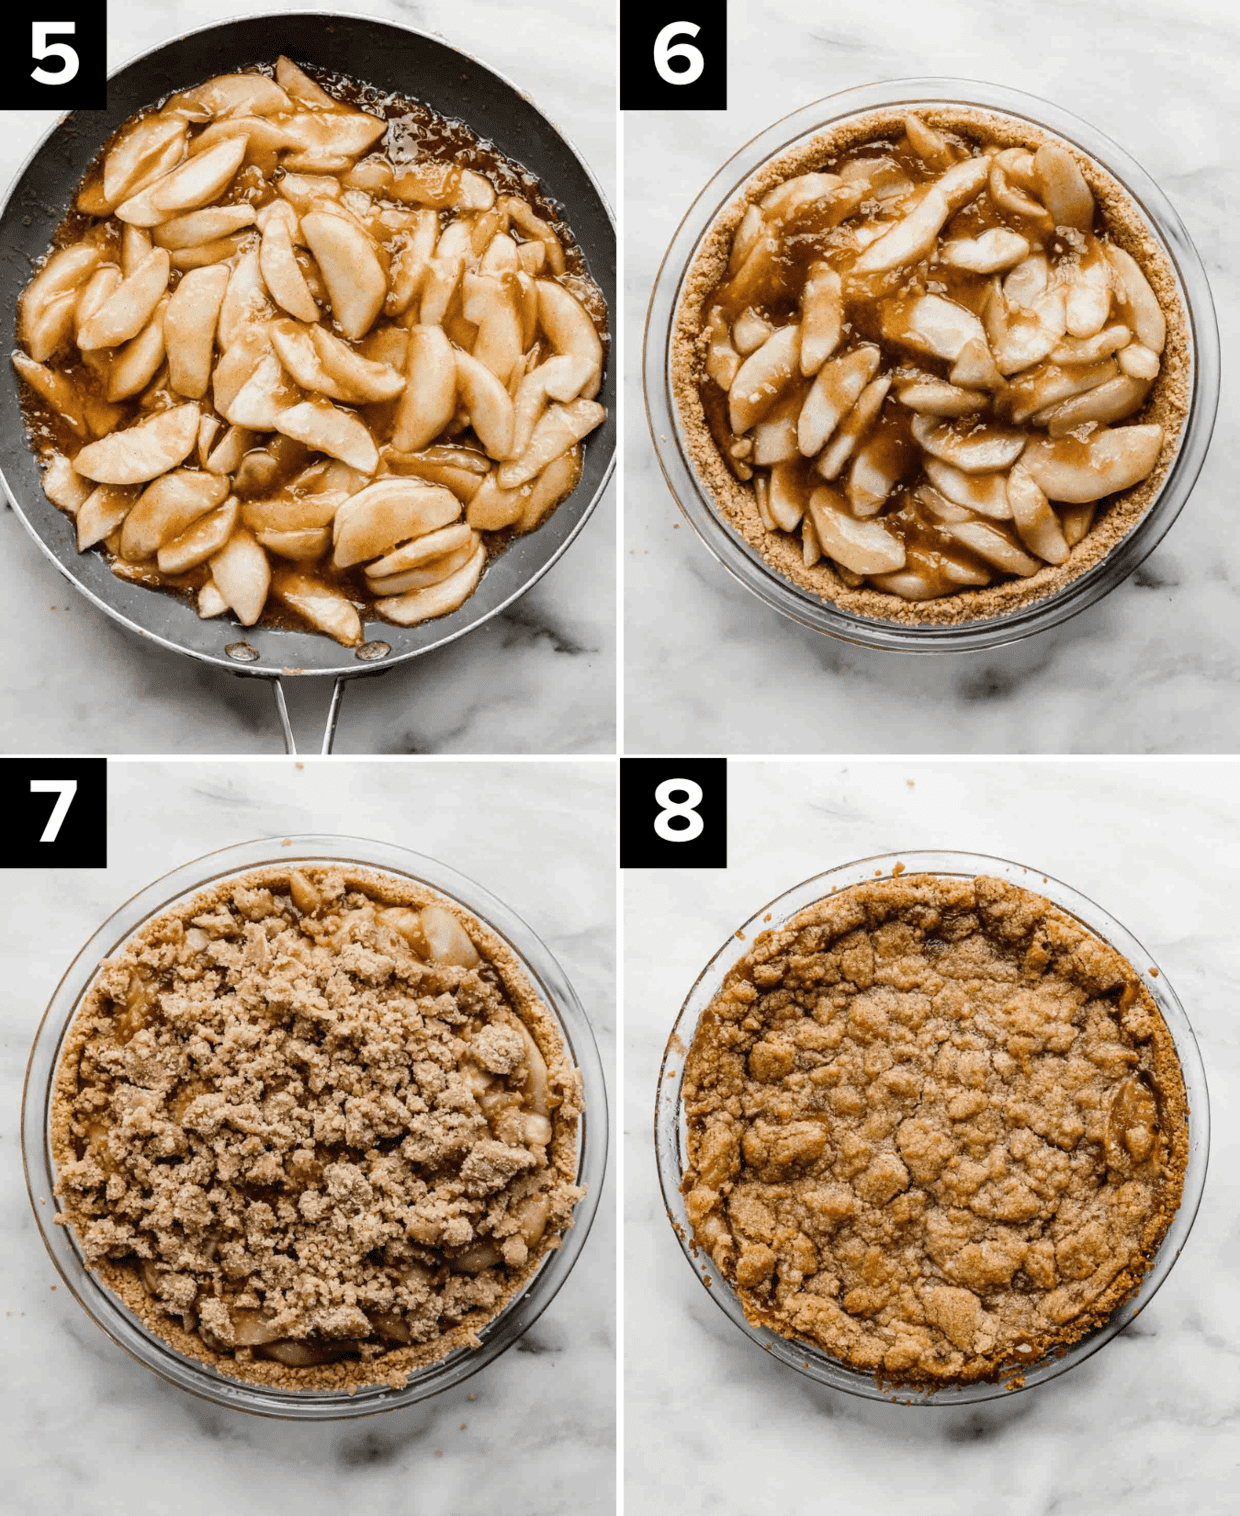 Four images showing how to make an Apple Pie with Graham Cracker Crust, top left is apple pie filling in a skillet, top right is apple pie filling in a graham cracker crust, bottom left is a crumb topped apple pie, and bottom left is a baked apple pie recipe on a white background.